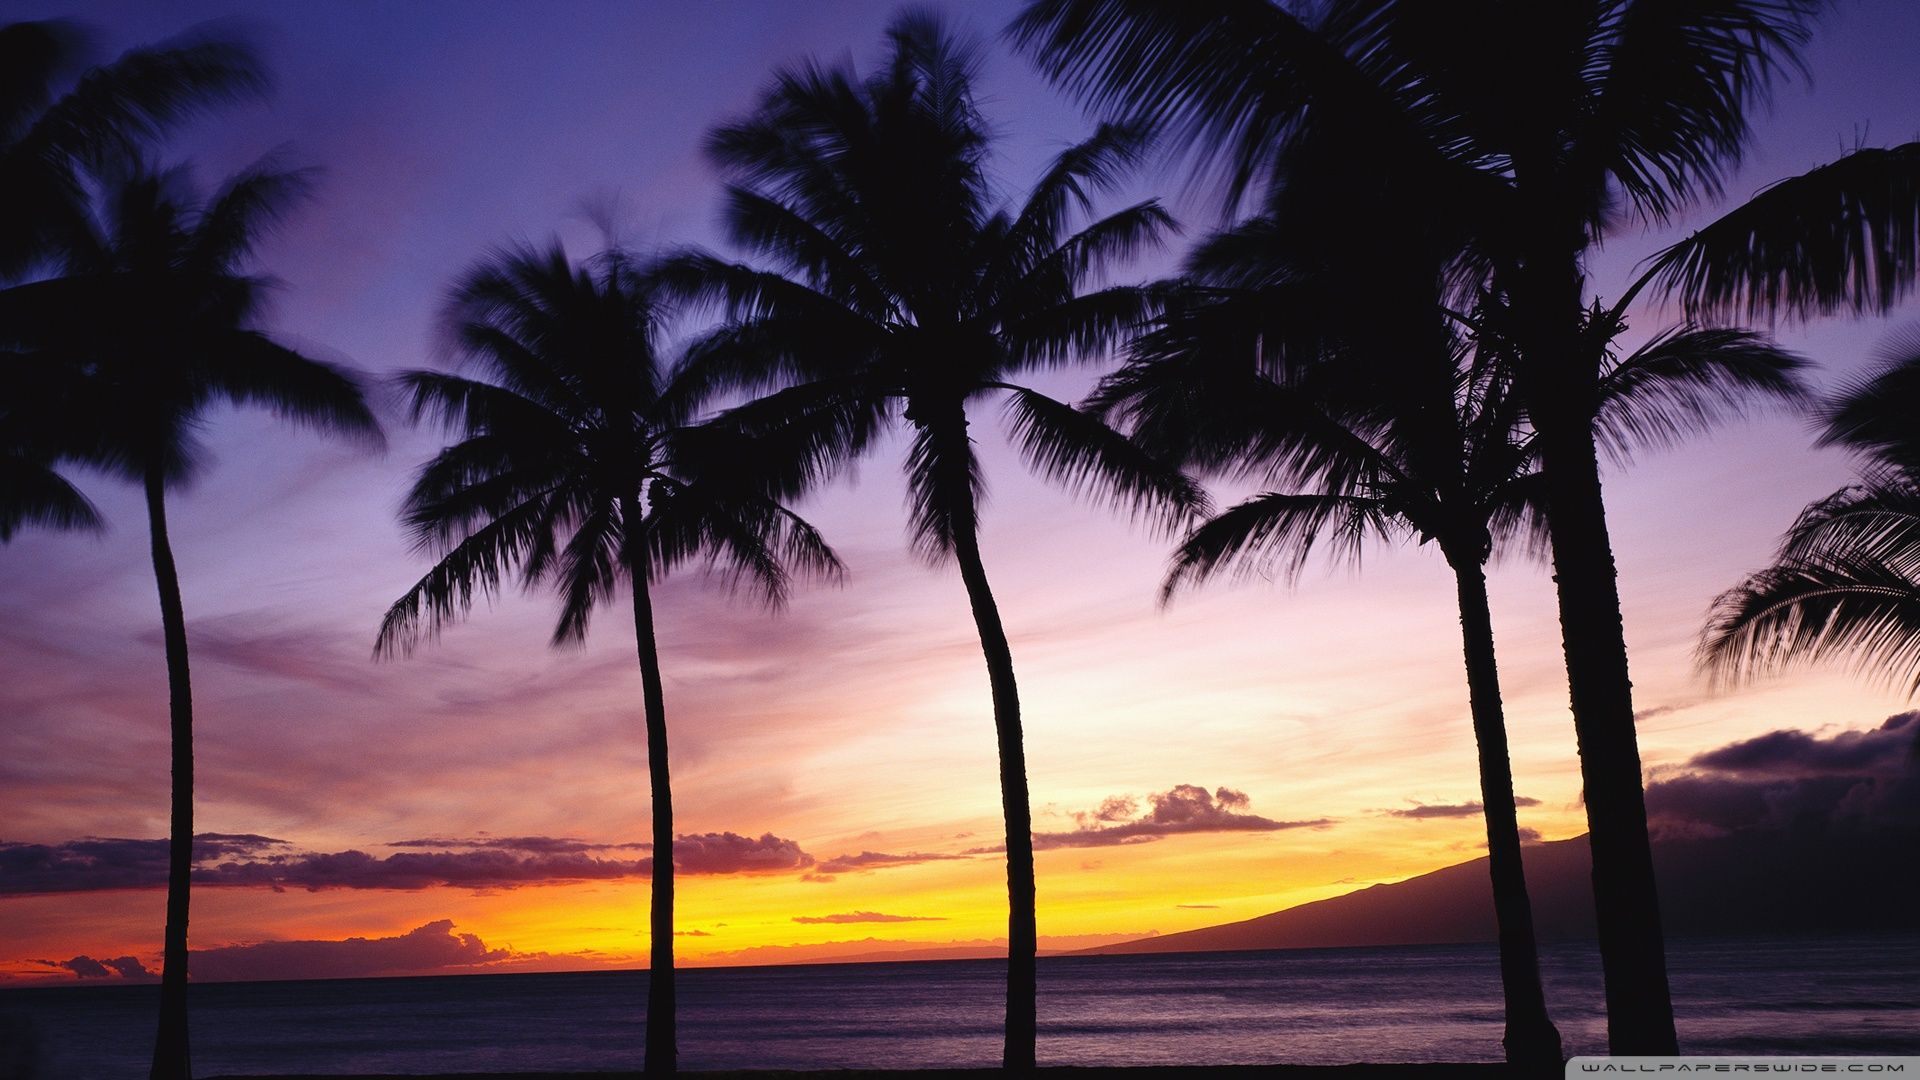 Image for Beach Sunset With Palm Trees Wallpaper Free Desktop